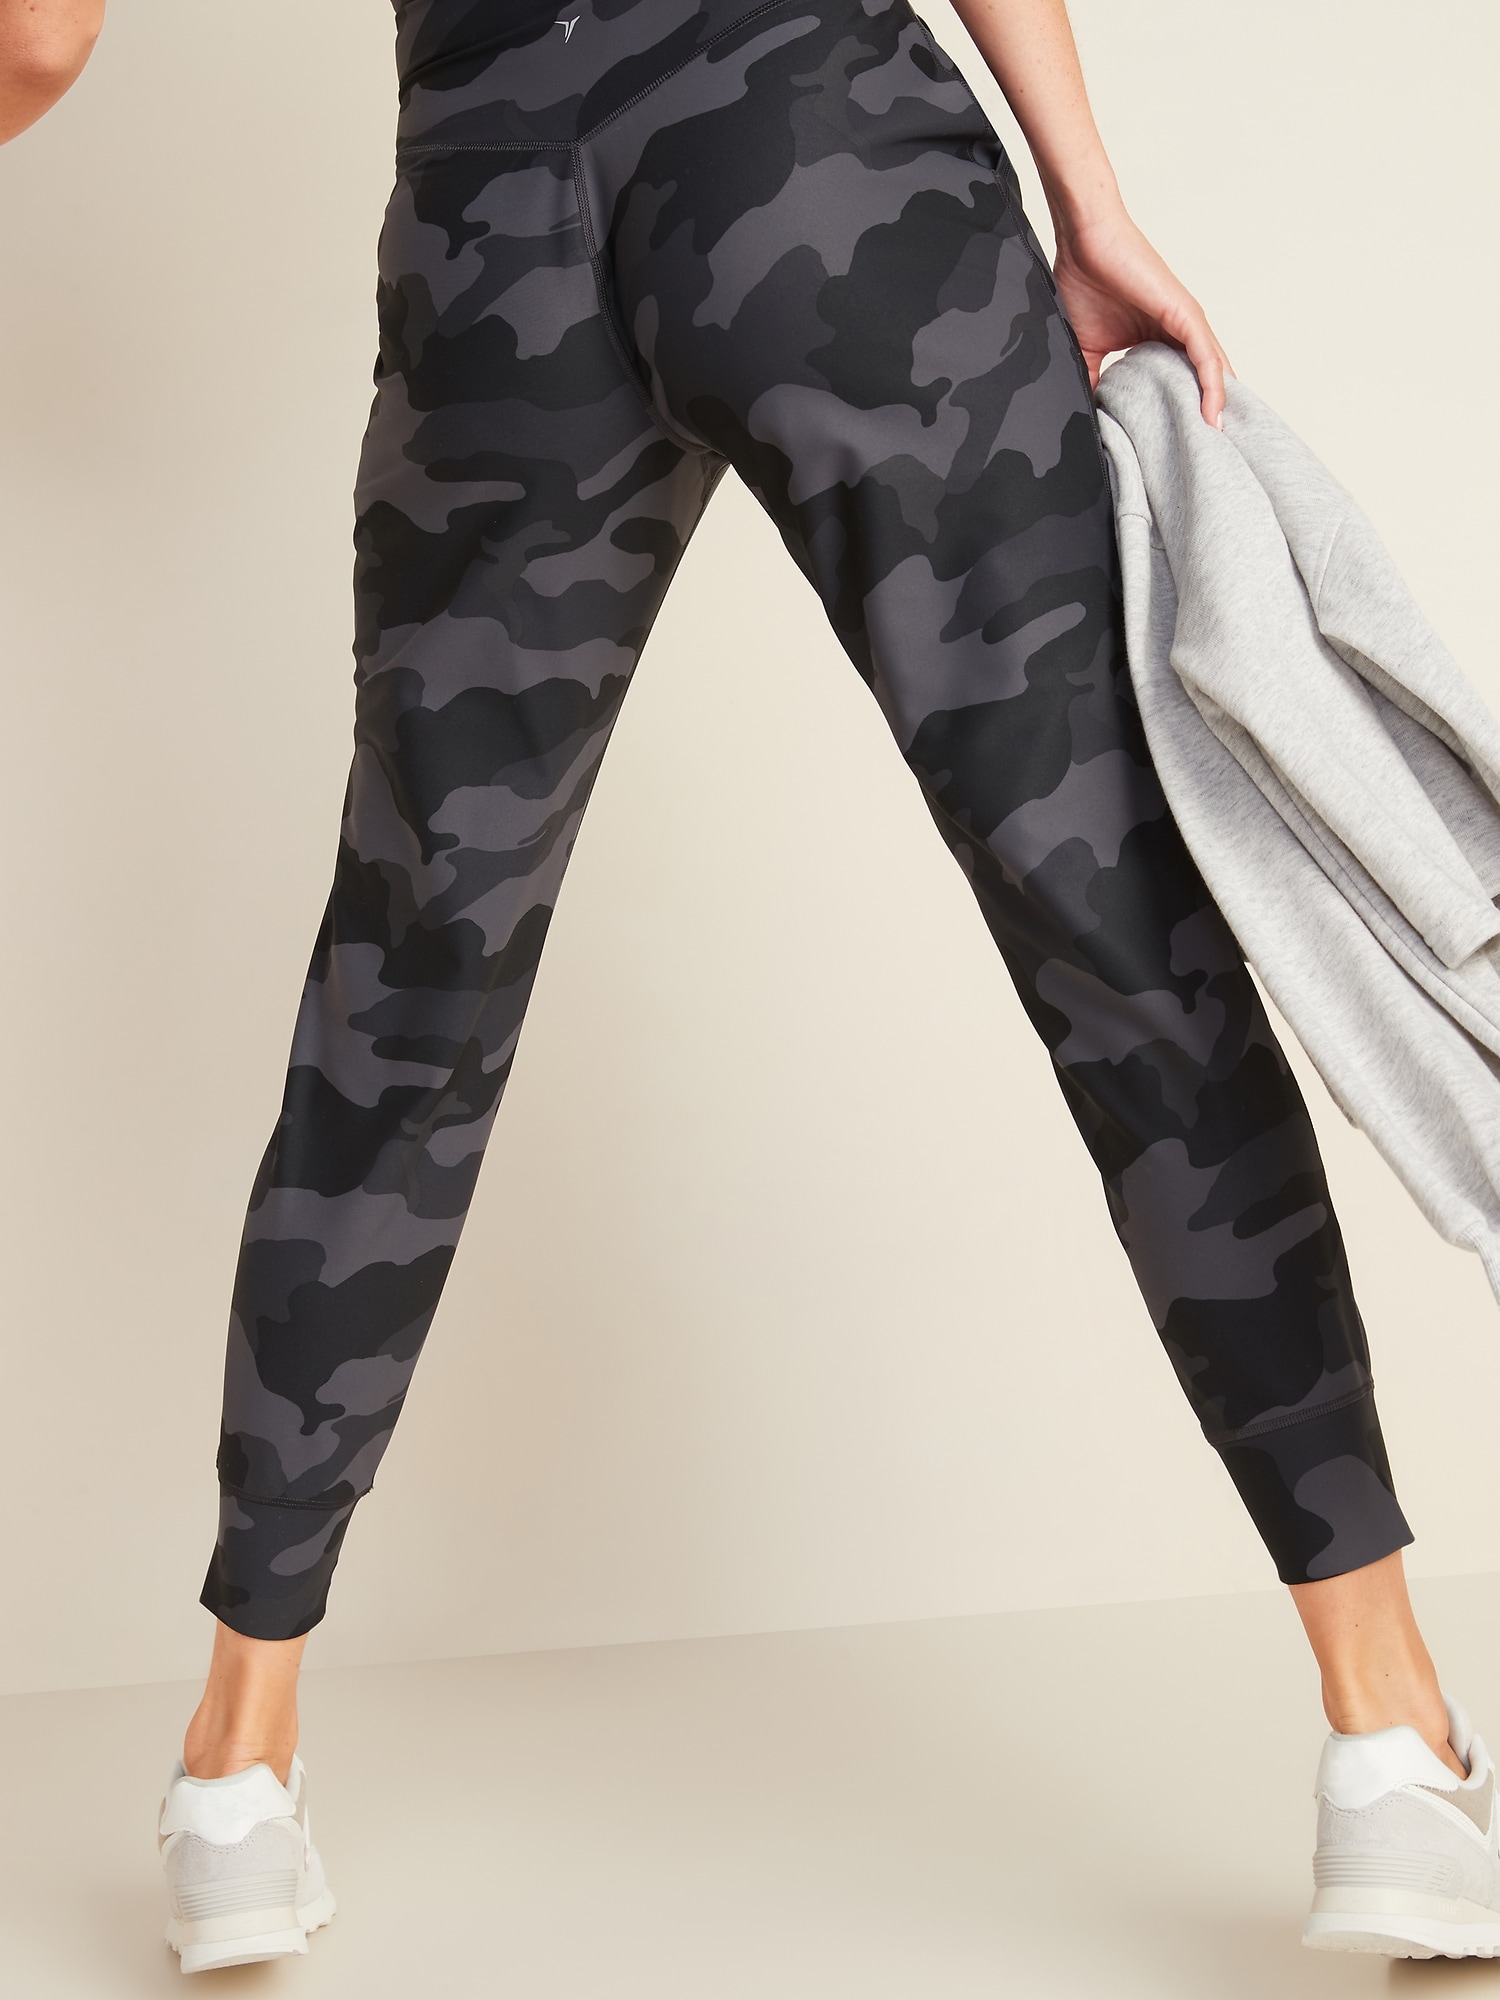 old navy women's camouflage pants